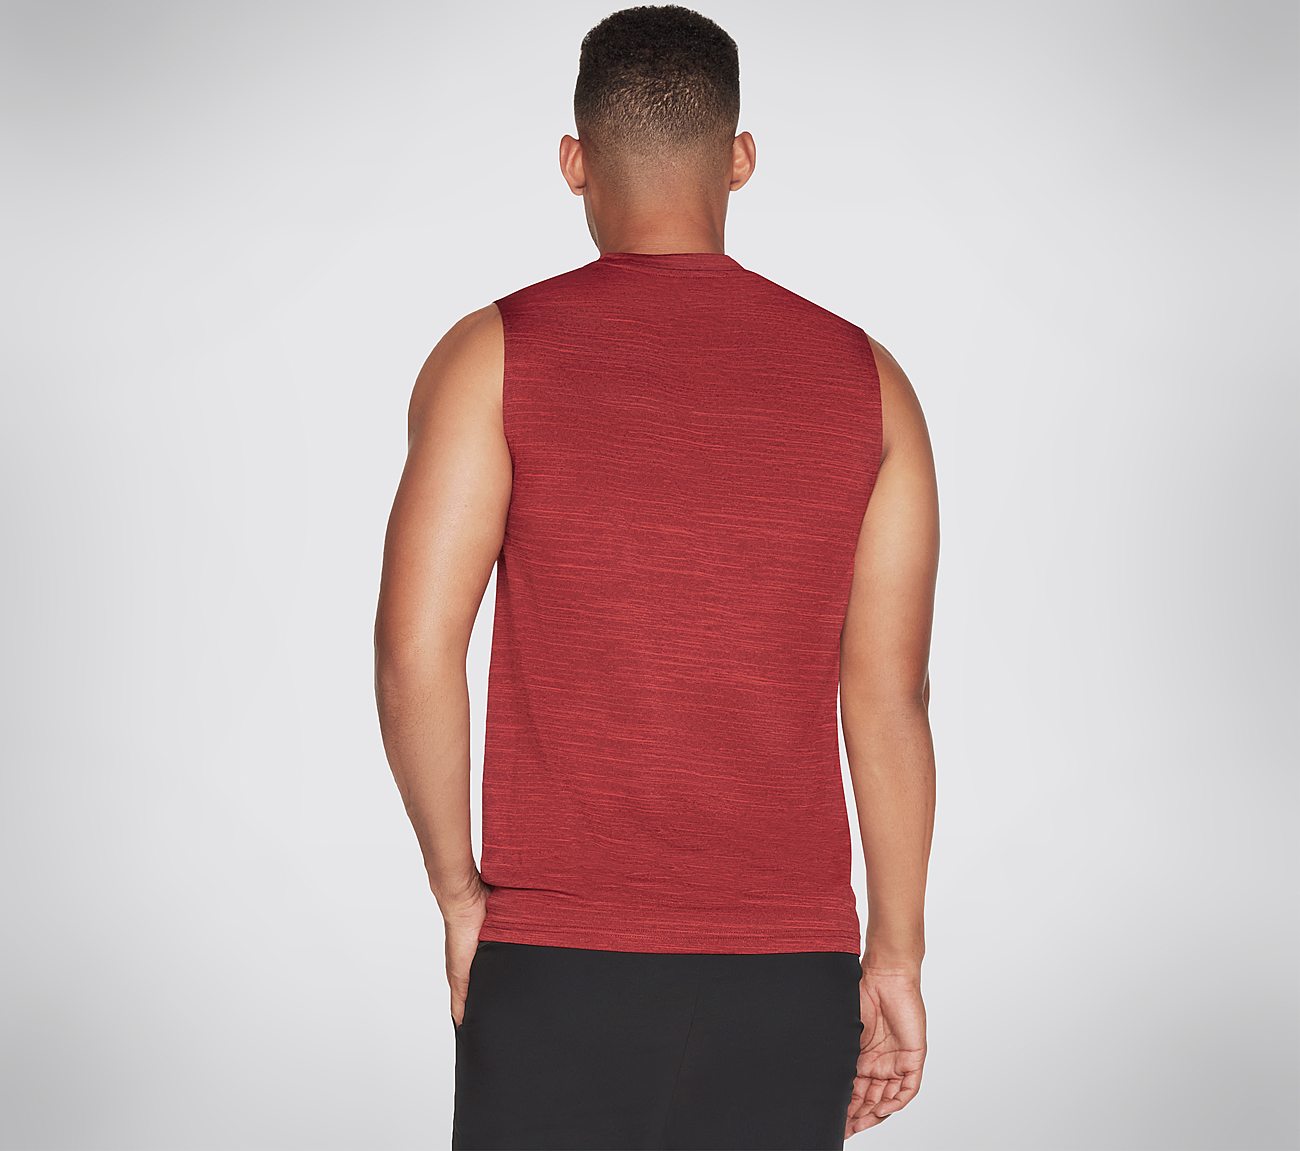 ON THE ROAD MUSCLE TANK, RRED Apparels Top View